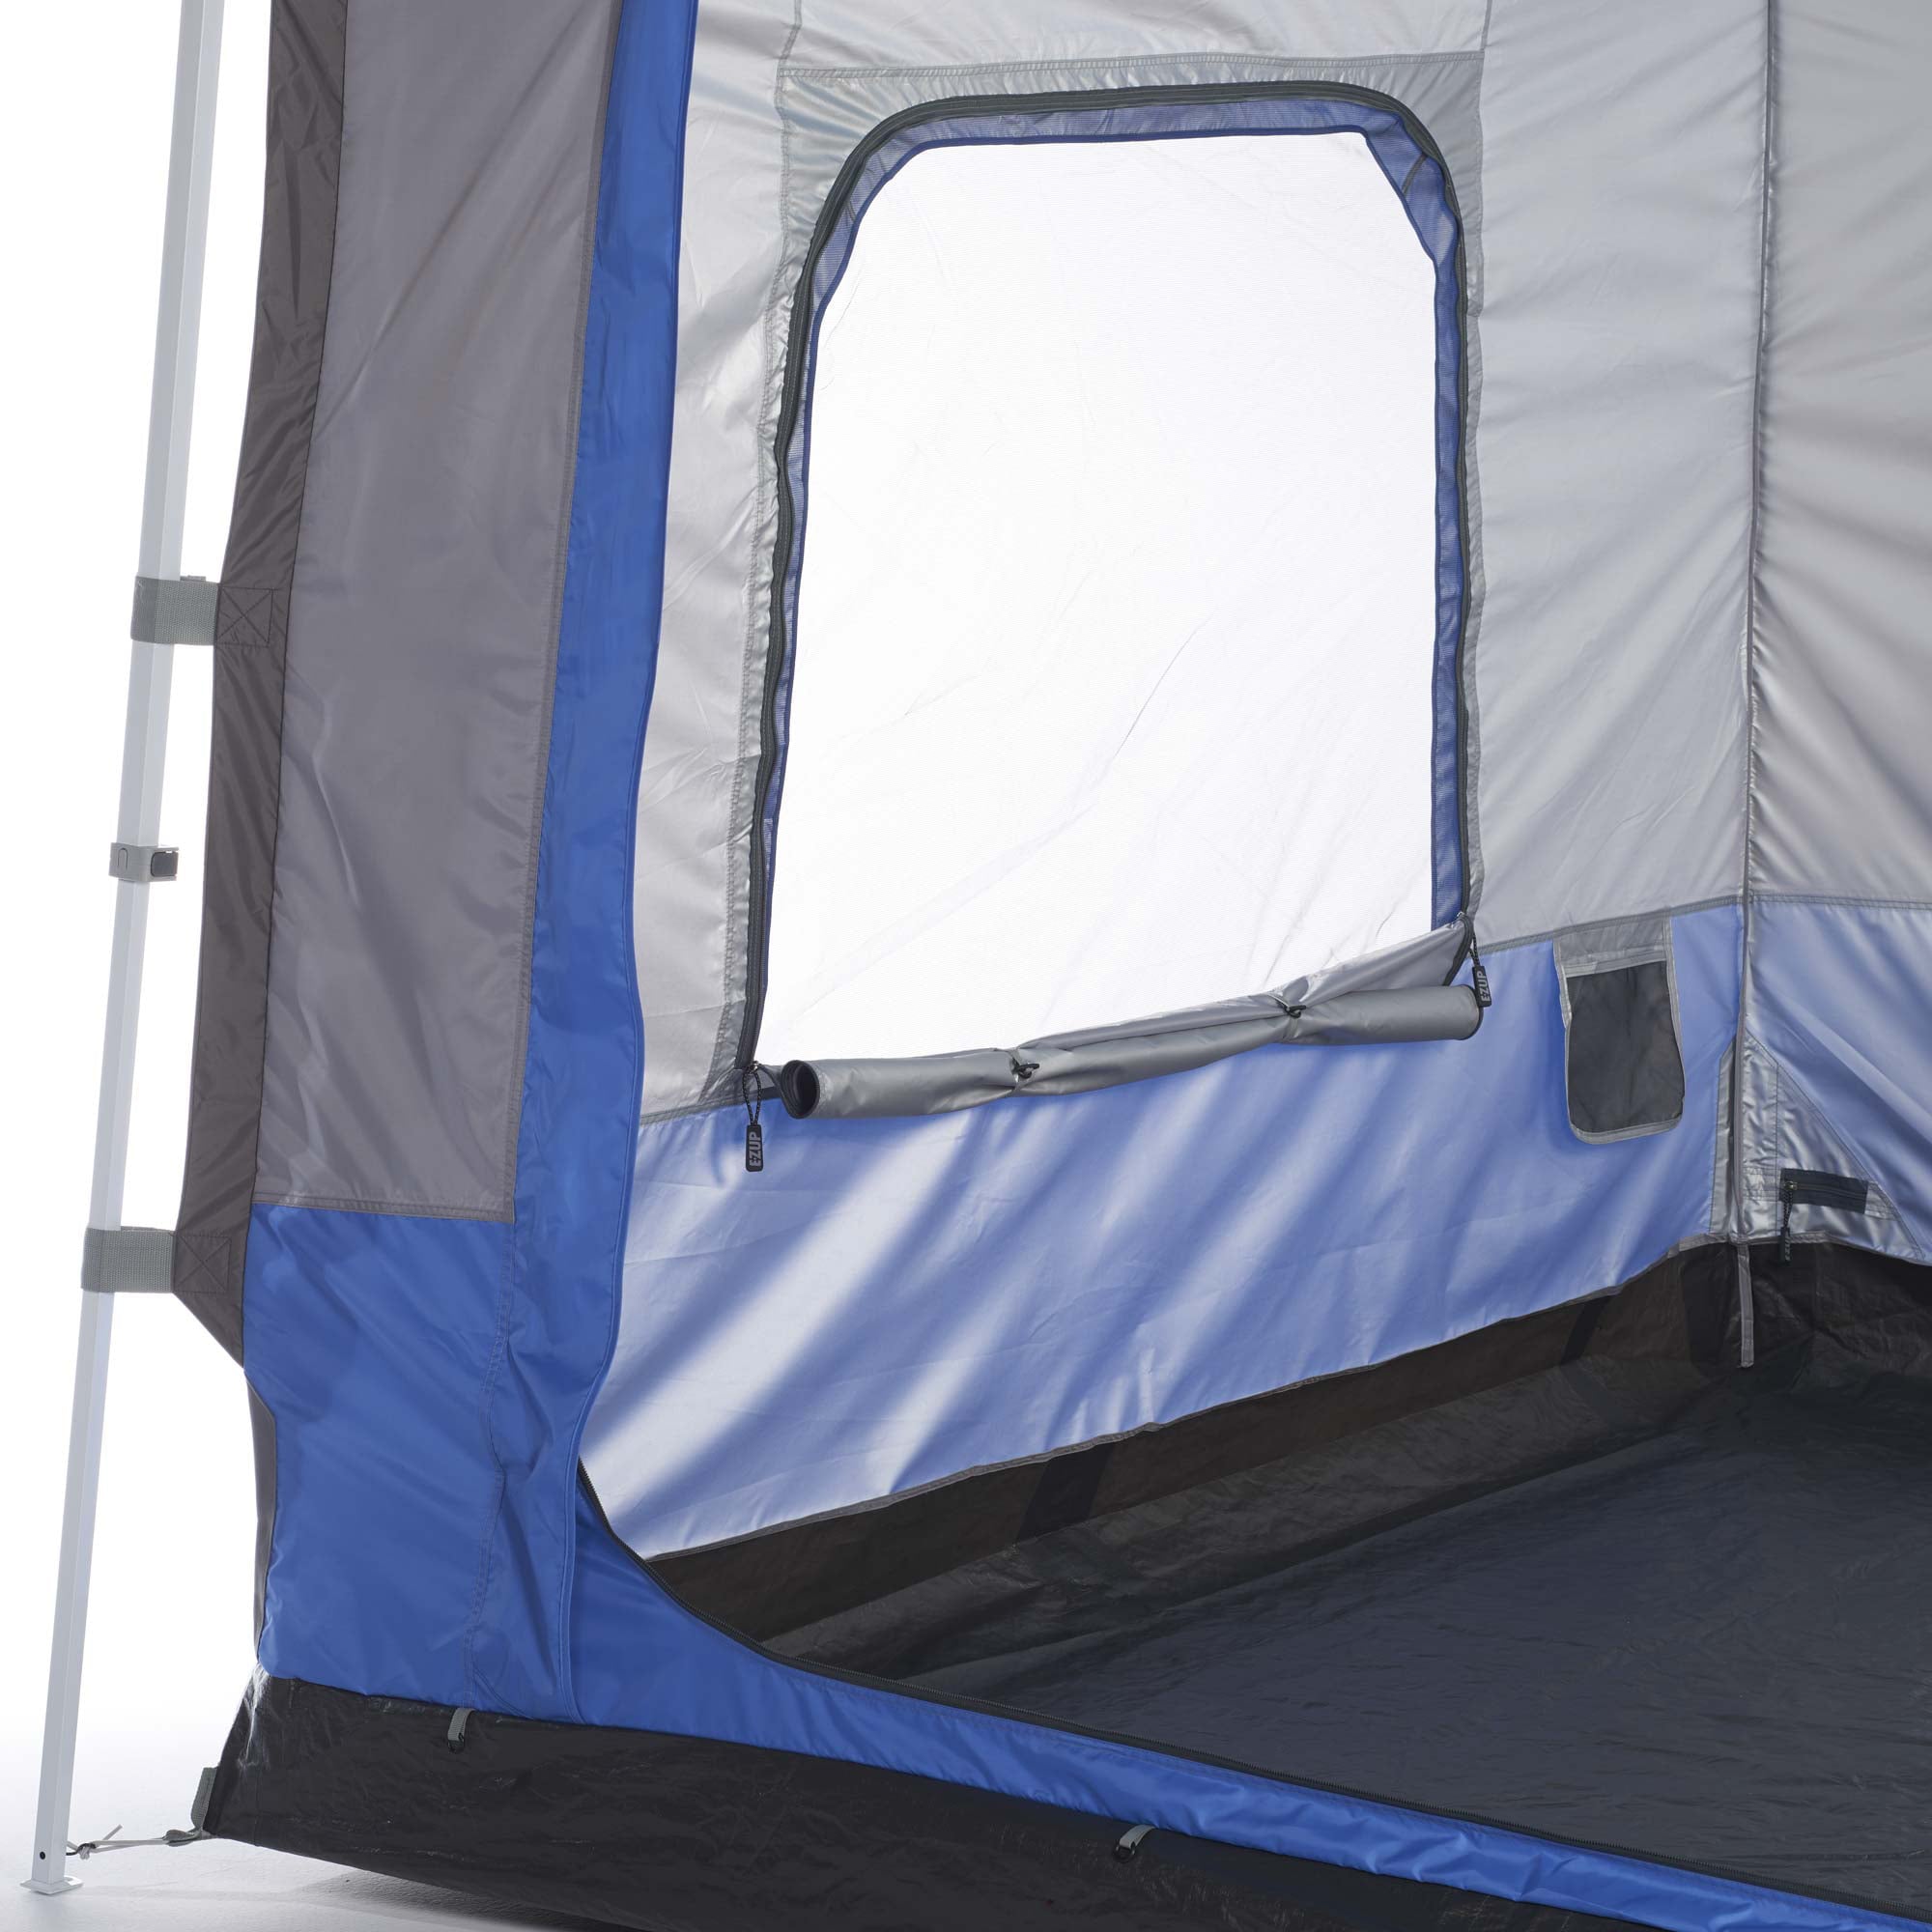 E-Z Up® Camping Cube™ 6.4, Outdoor Camping Cube Converts to 10" Straight Canopy Tent, Royal Blue